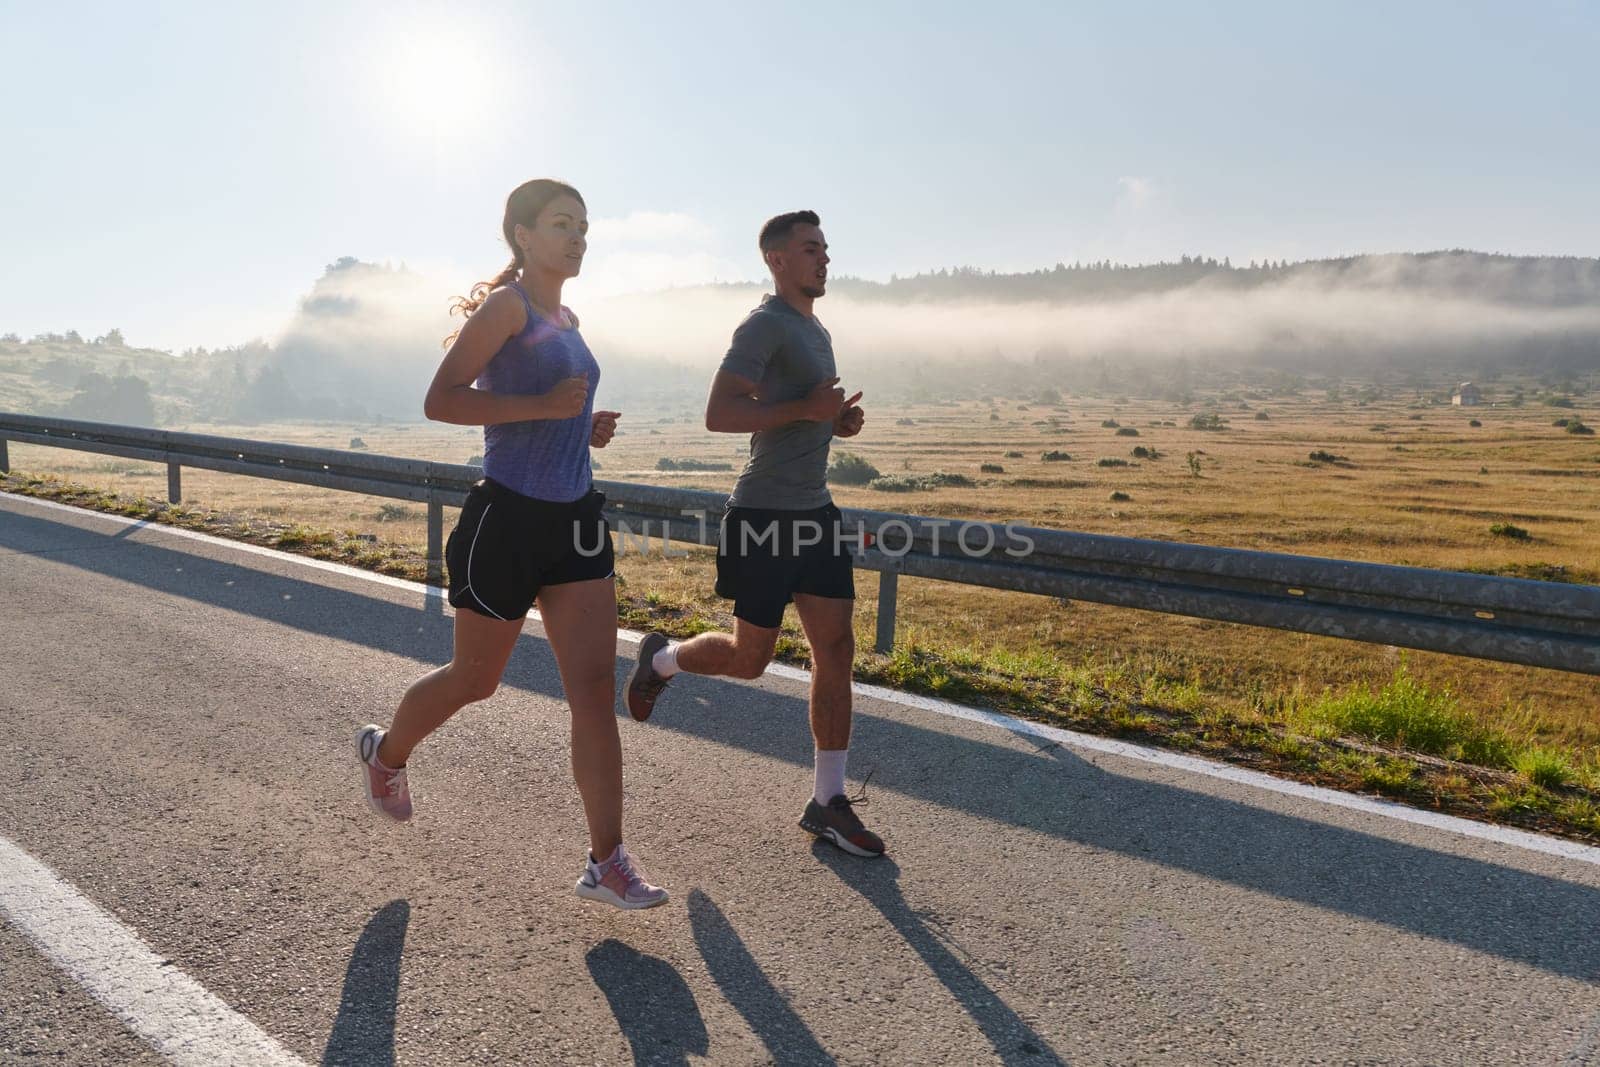 A couple runs through a sun-dappled road, their bodies strong and healthy, their love for each other and the outdoors evident in every stride.